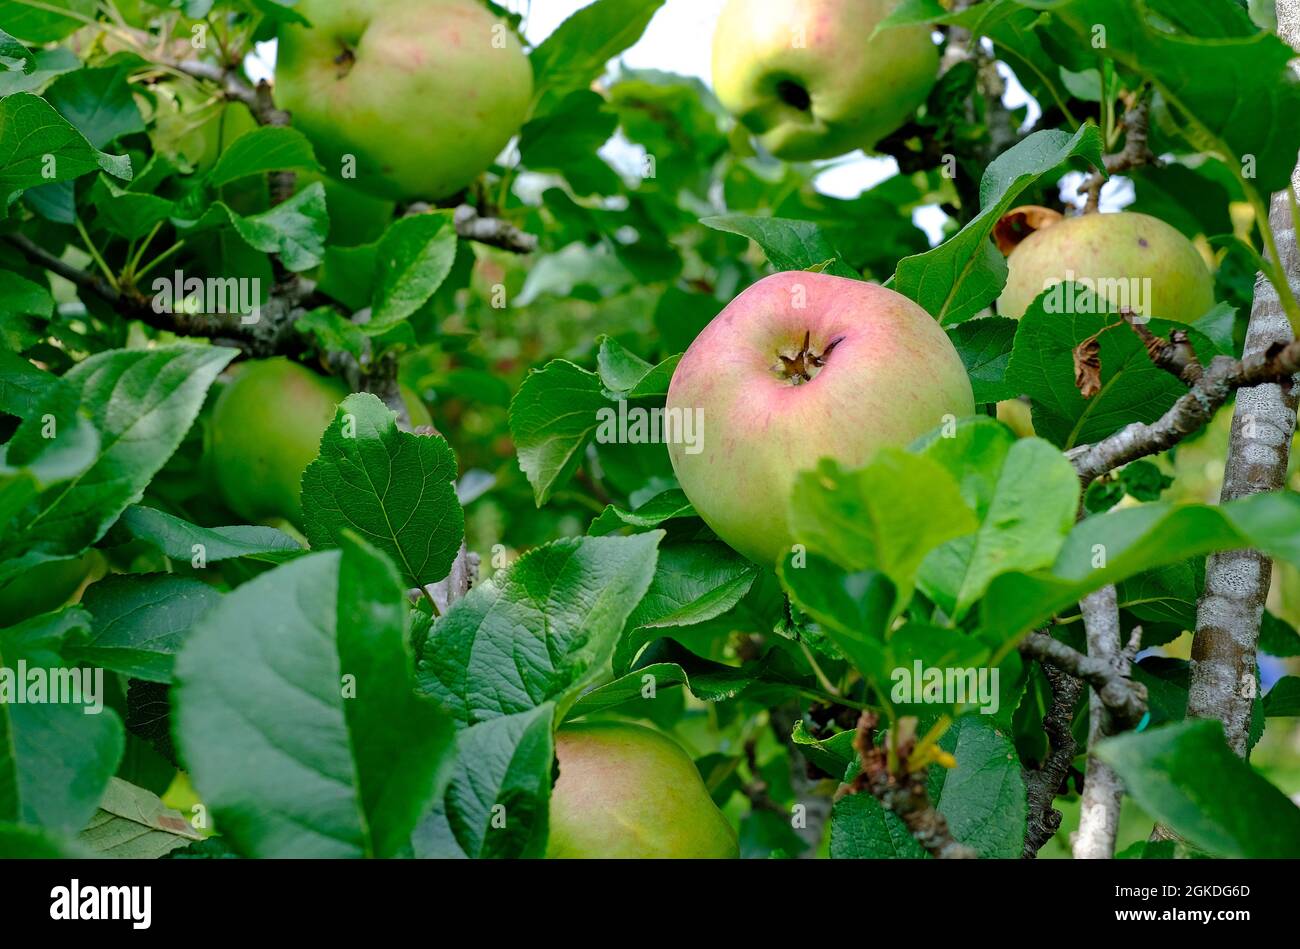 malus howgate wonder cooking apples on tree in orchard, yorkshire, england Stock Photo